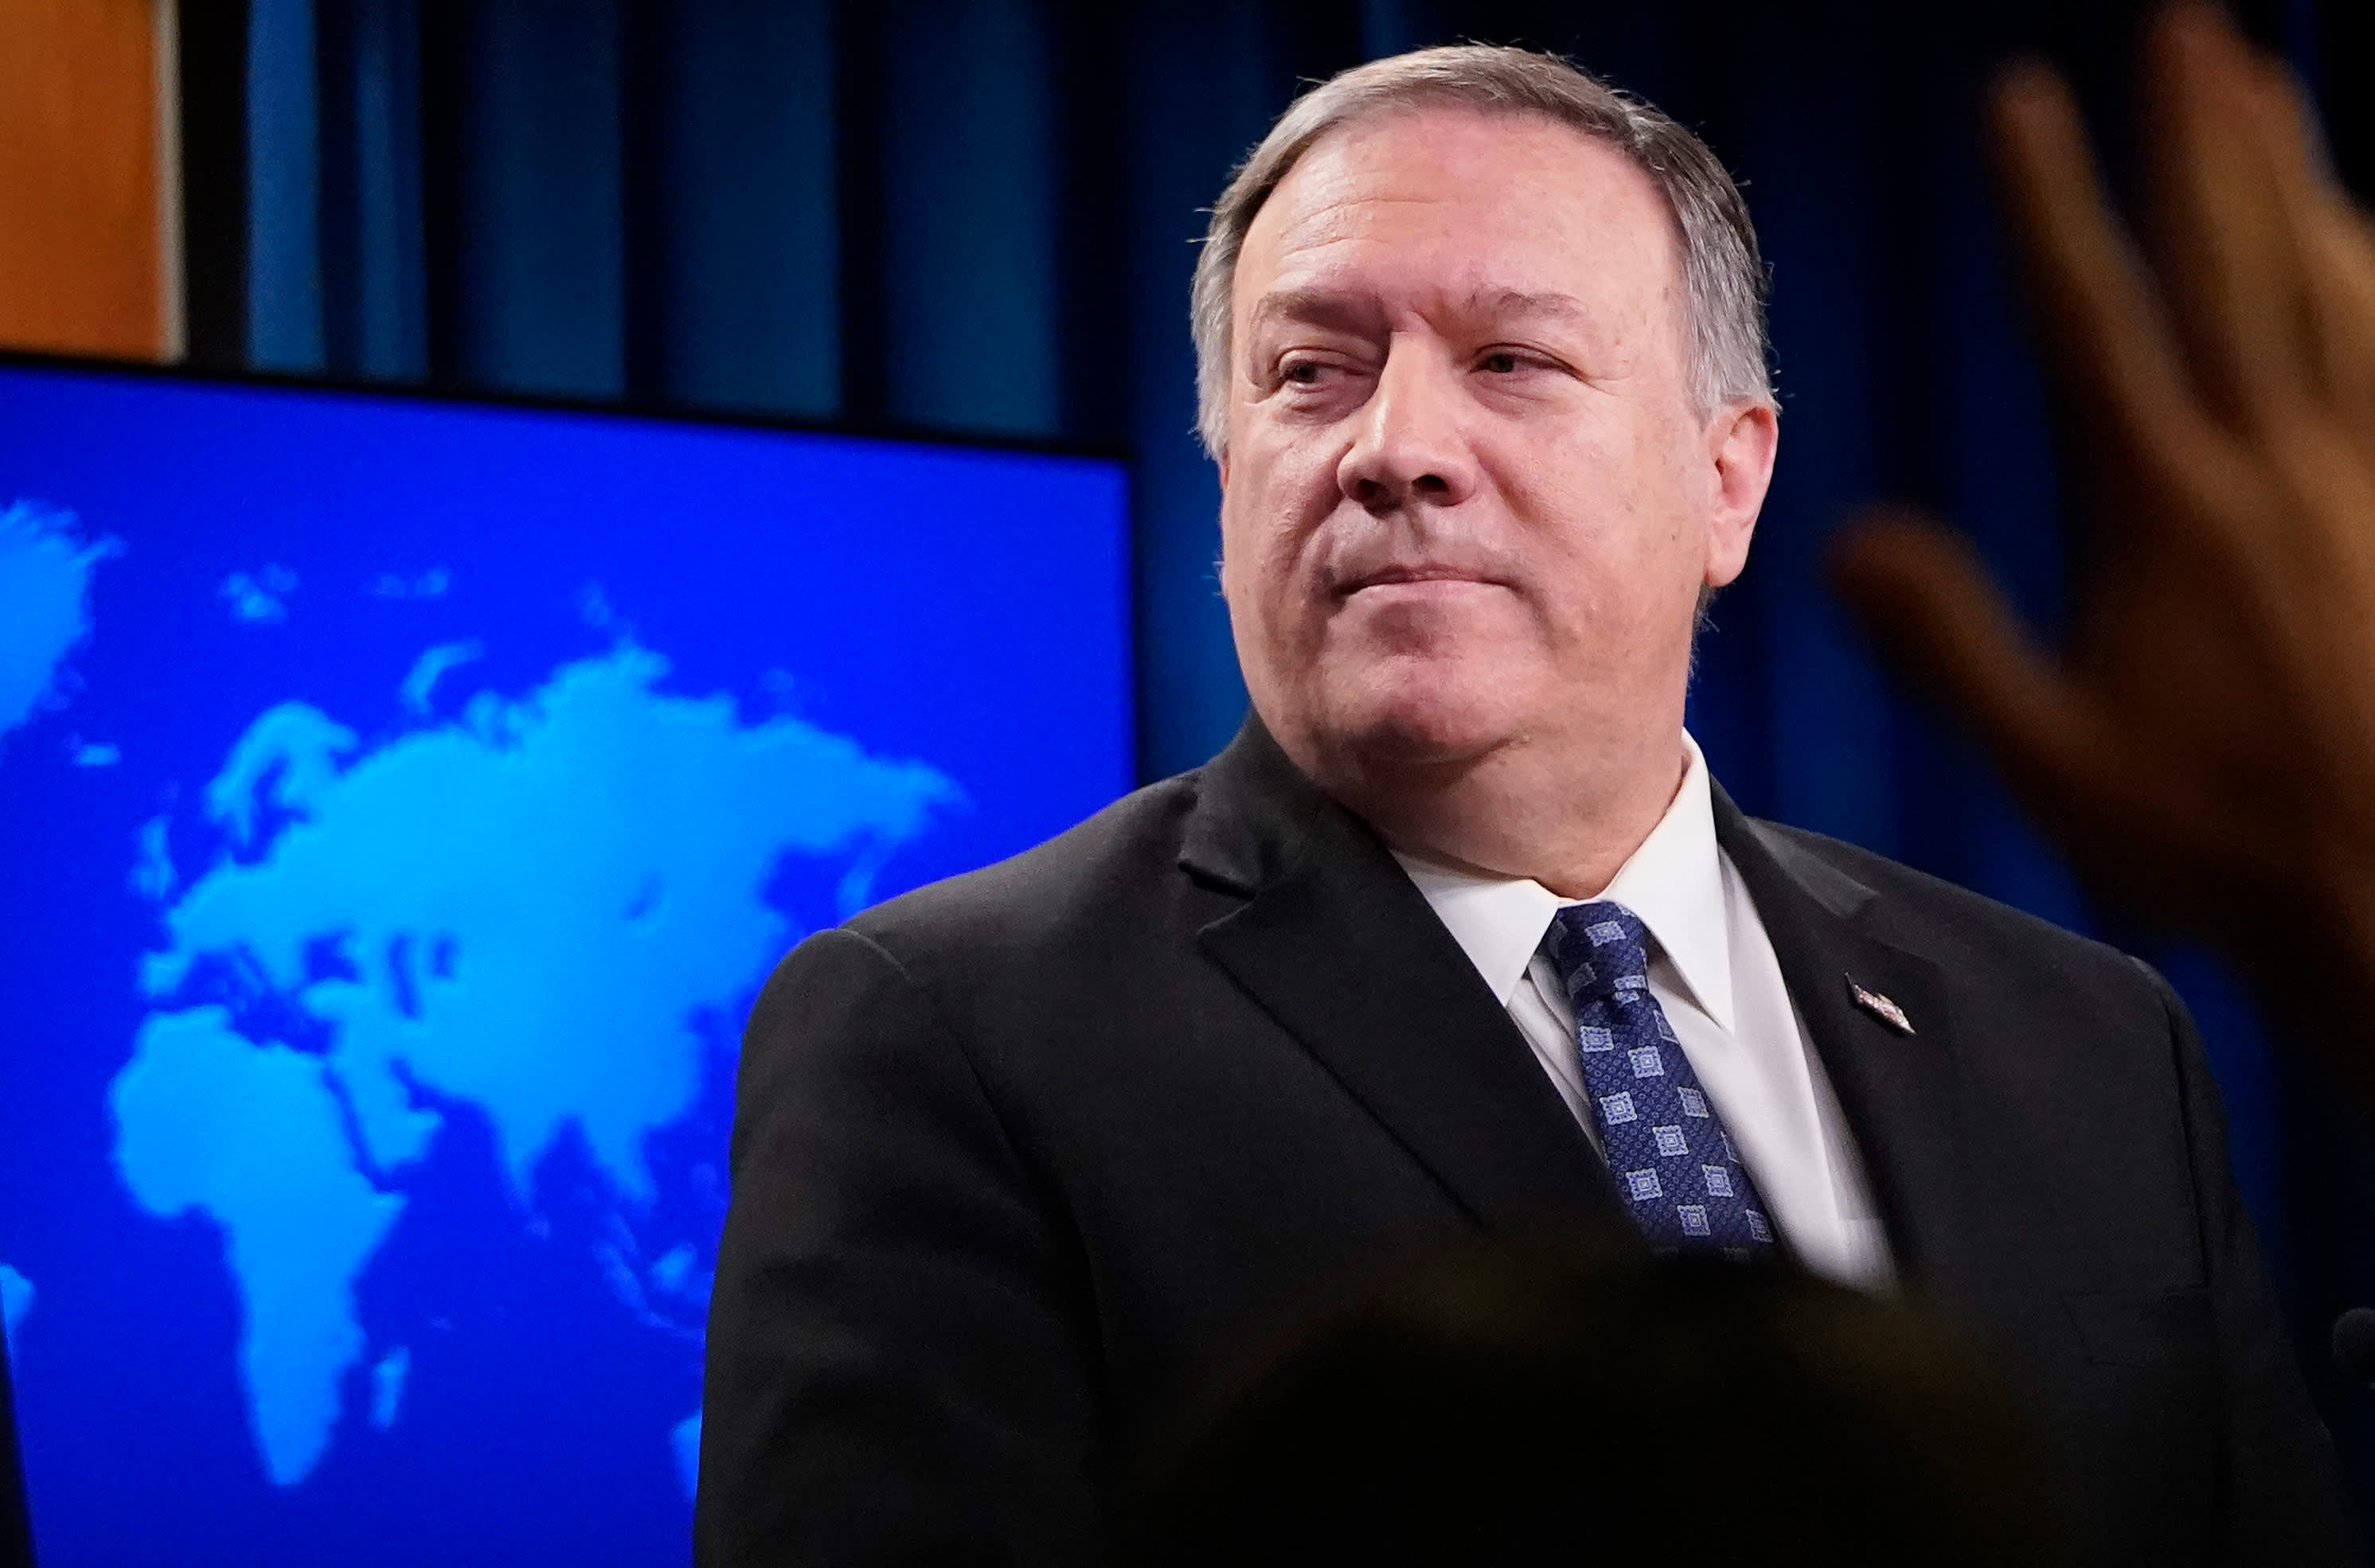 Pompeo lays ‘landmines’ in US-China relations, says Australian Kevin Rudd